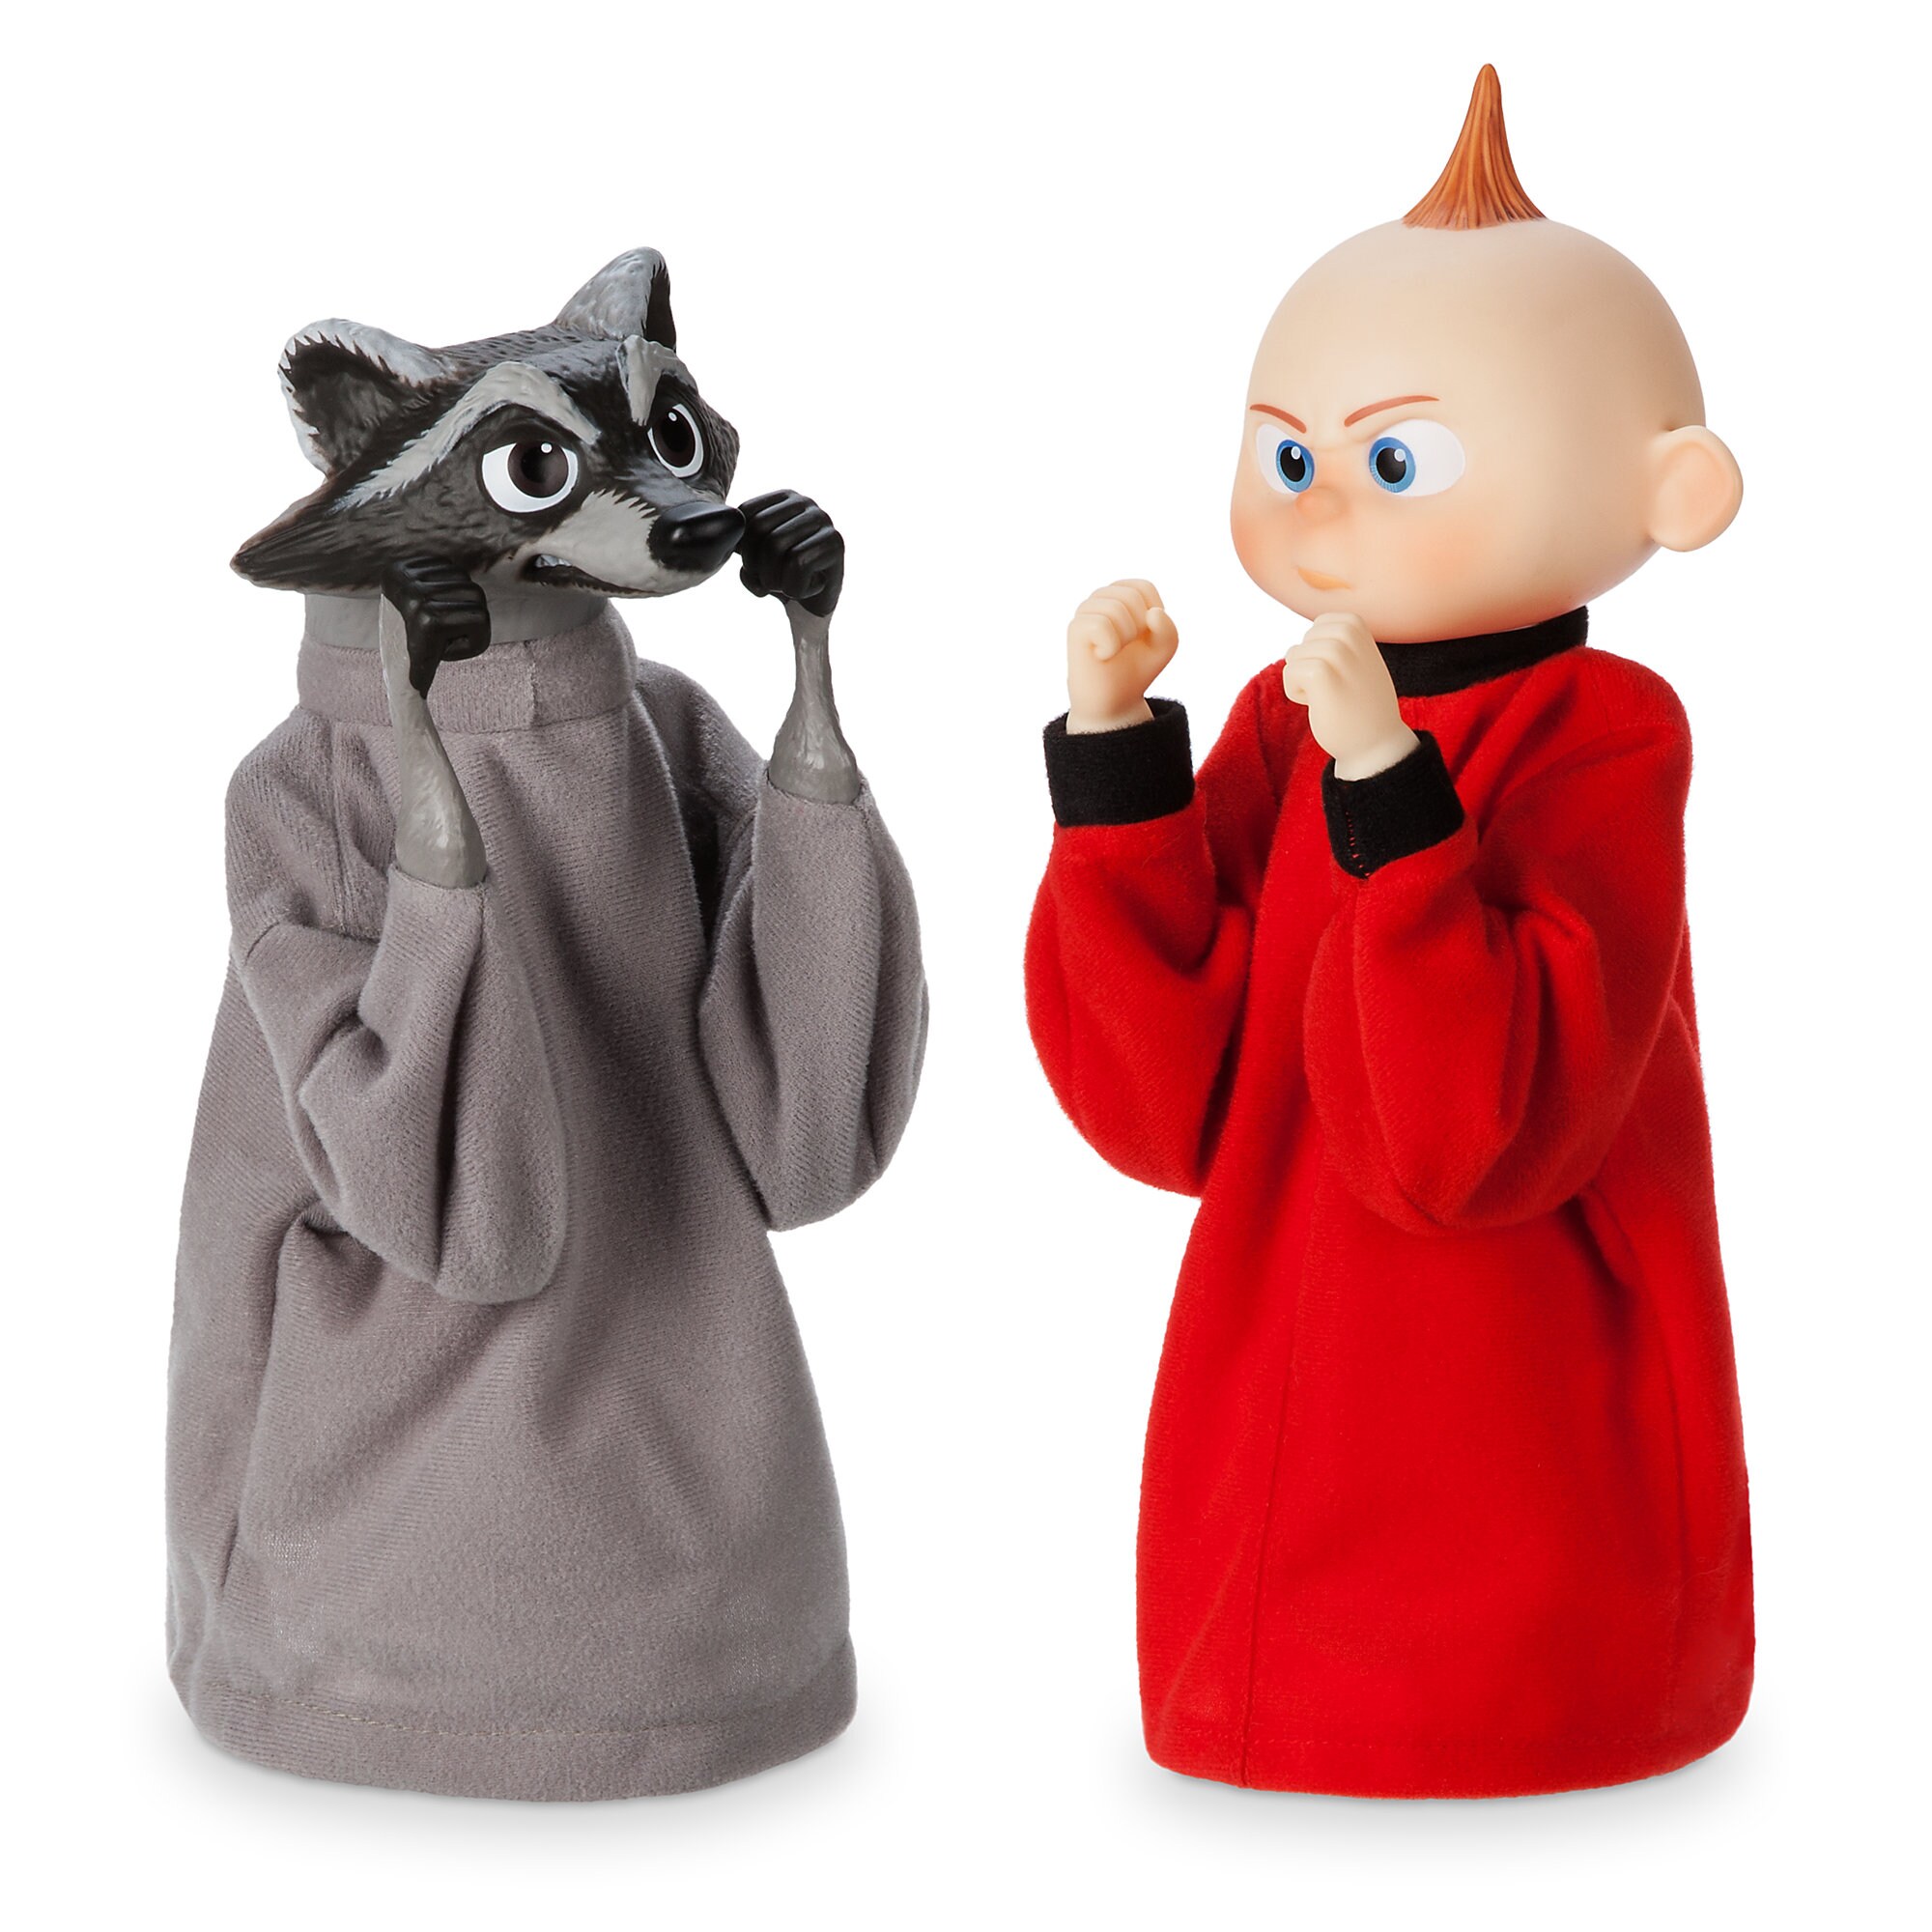 Jack-Jack and Raccoon Boxing Puppet Set - Incredibles 2